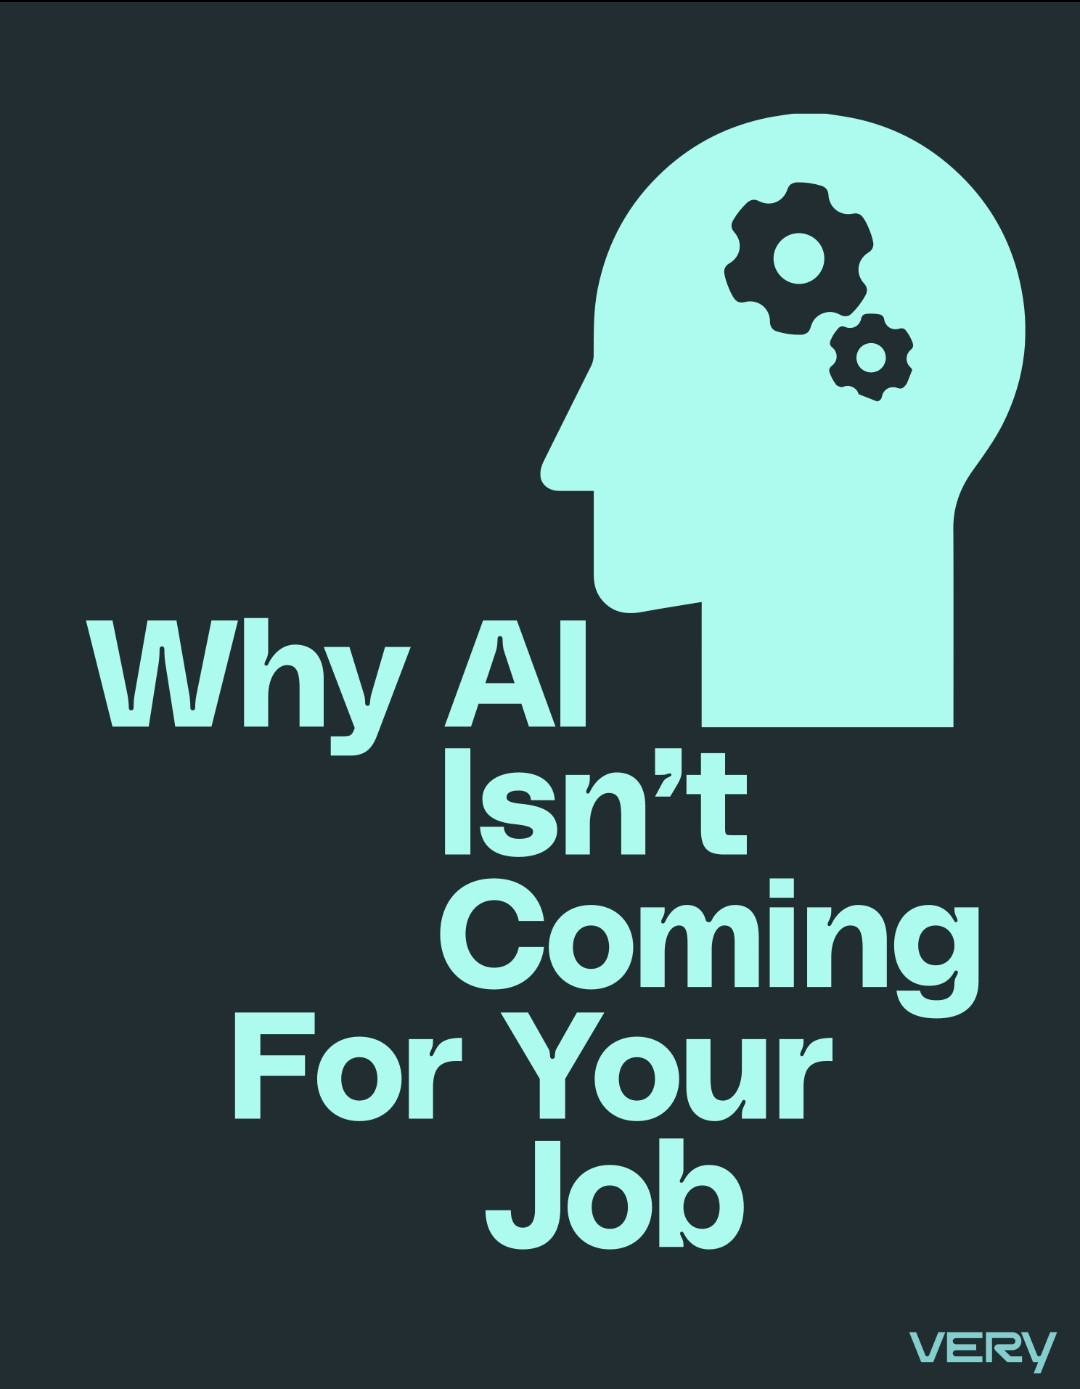 Why AI Isn't Coming for Your Job